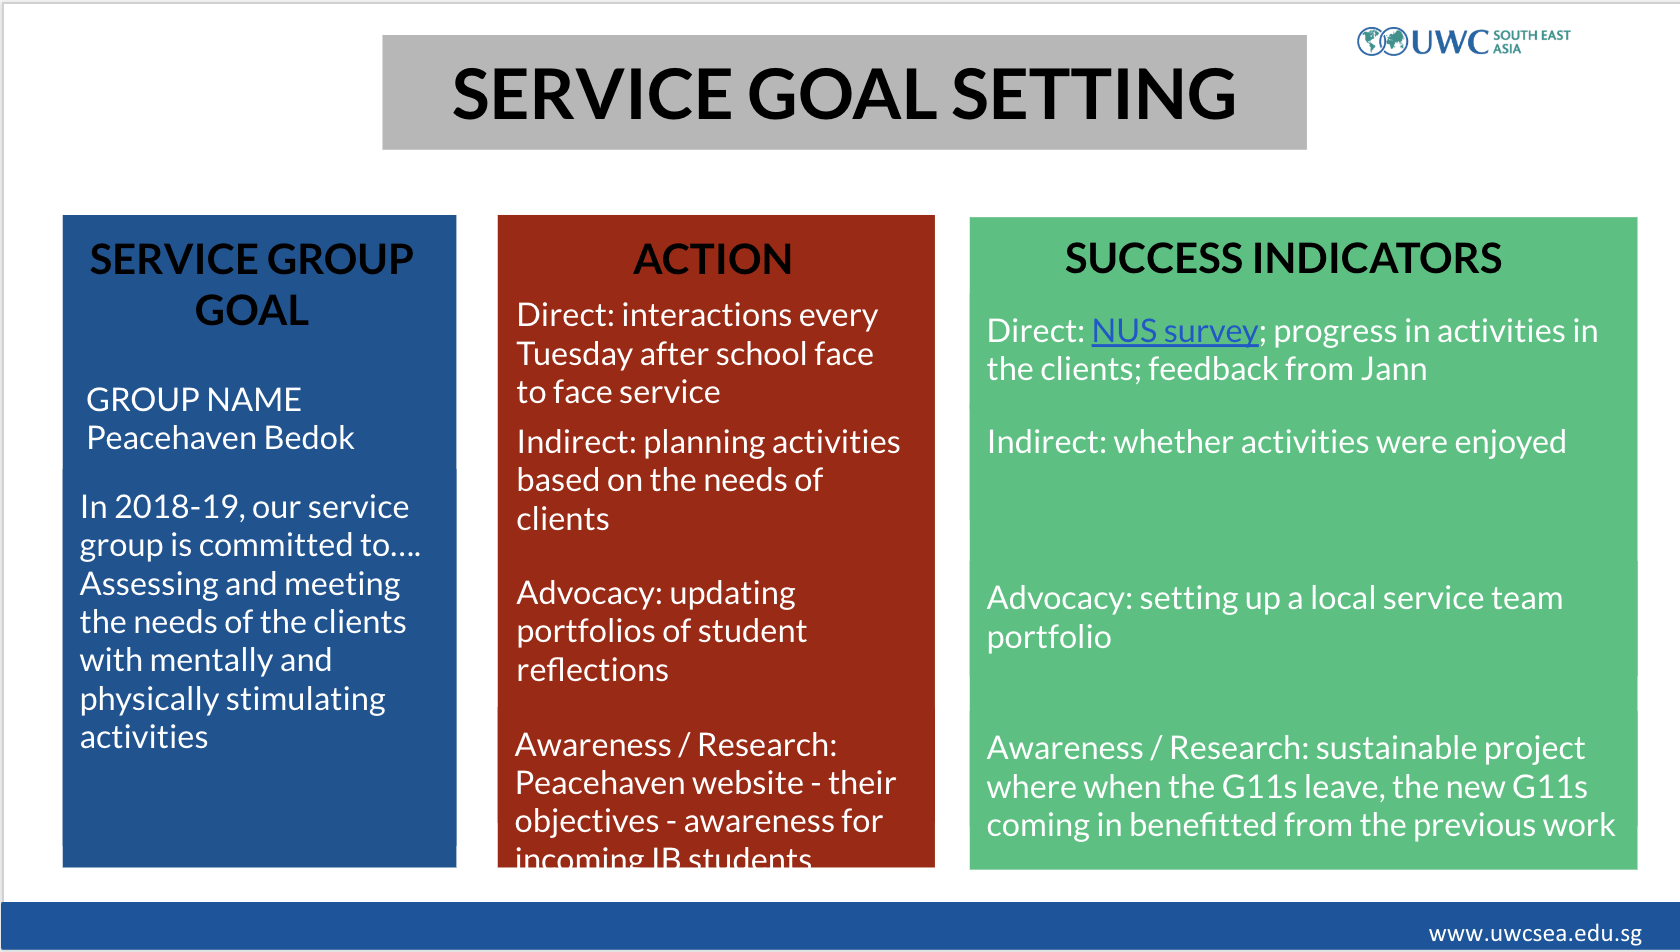 Our Service Goal Setting